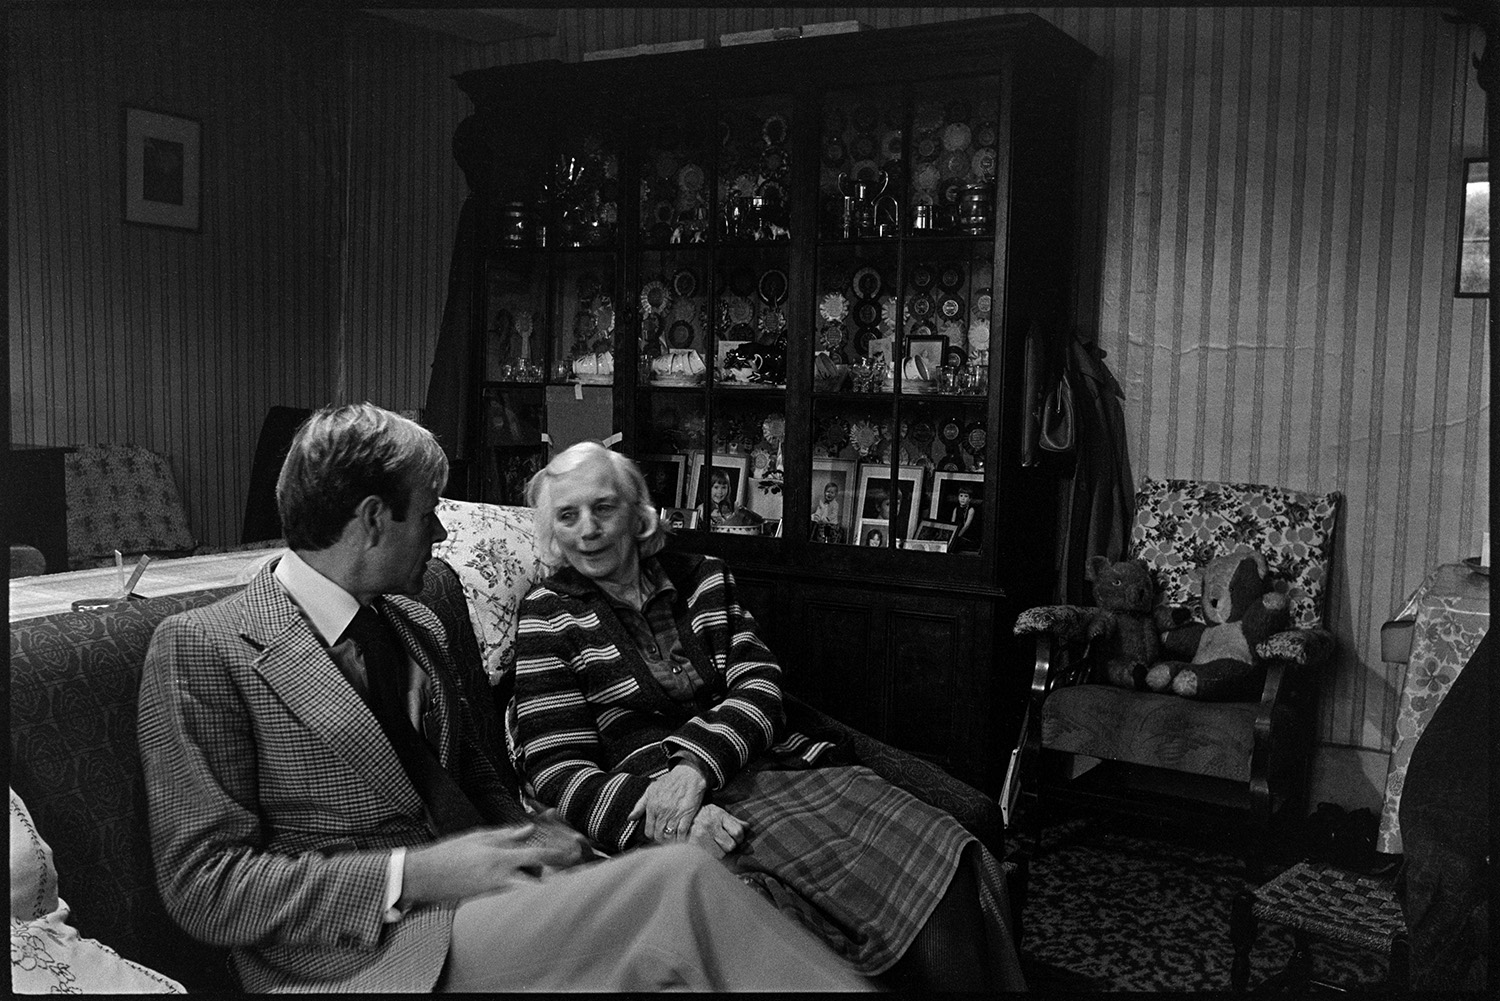 Doctor on rounds talking to woman patient in her sitting room. Fireplace, dresser. 
[Doctor Richard Westcott talking to Mrs Balment sat on a sofa in her living room in her house at Stoodleigh, Brayford. A display cabinet with photographs and china can be seen in the background.]